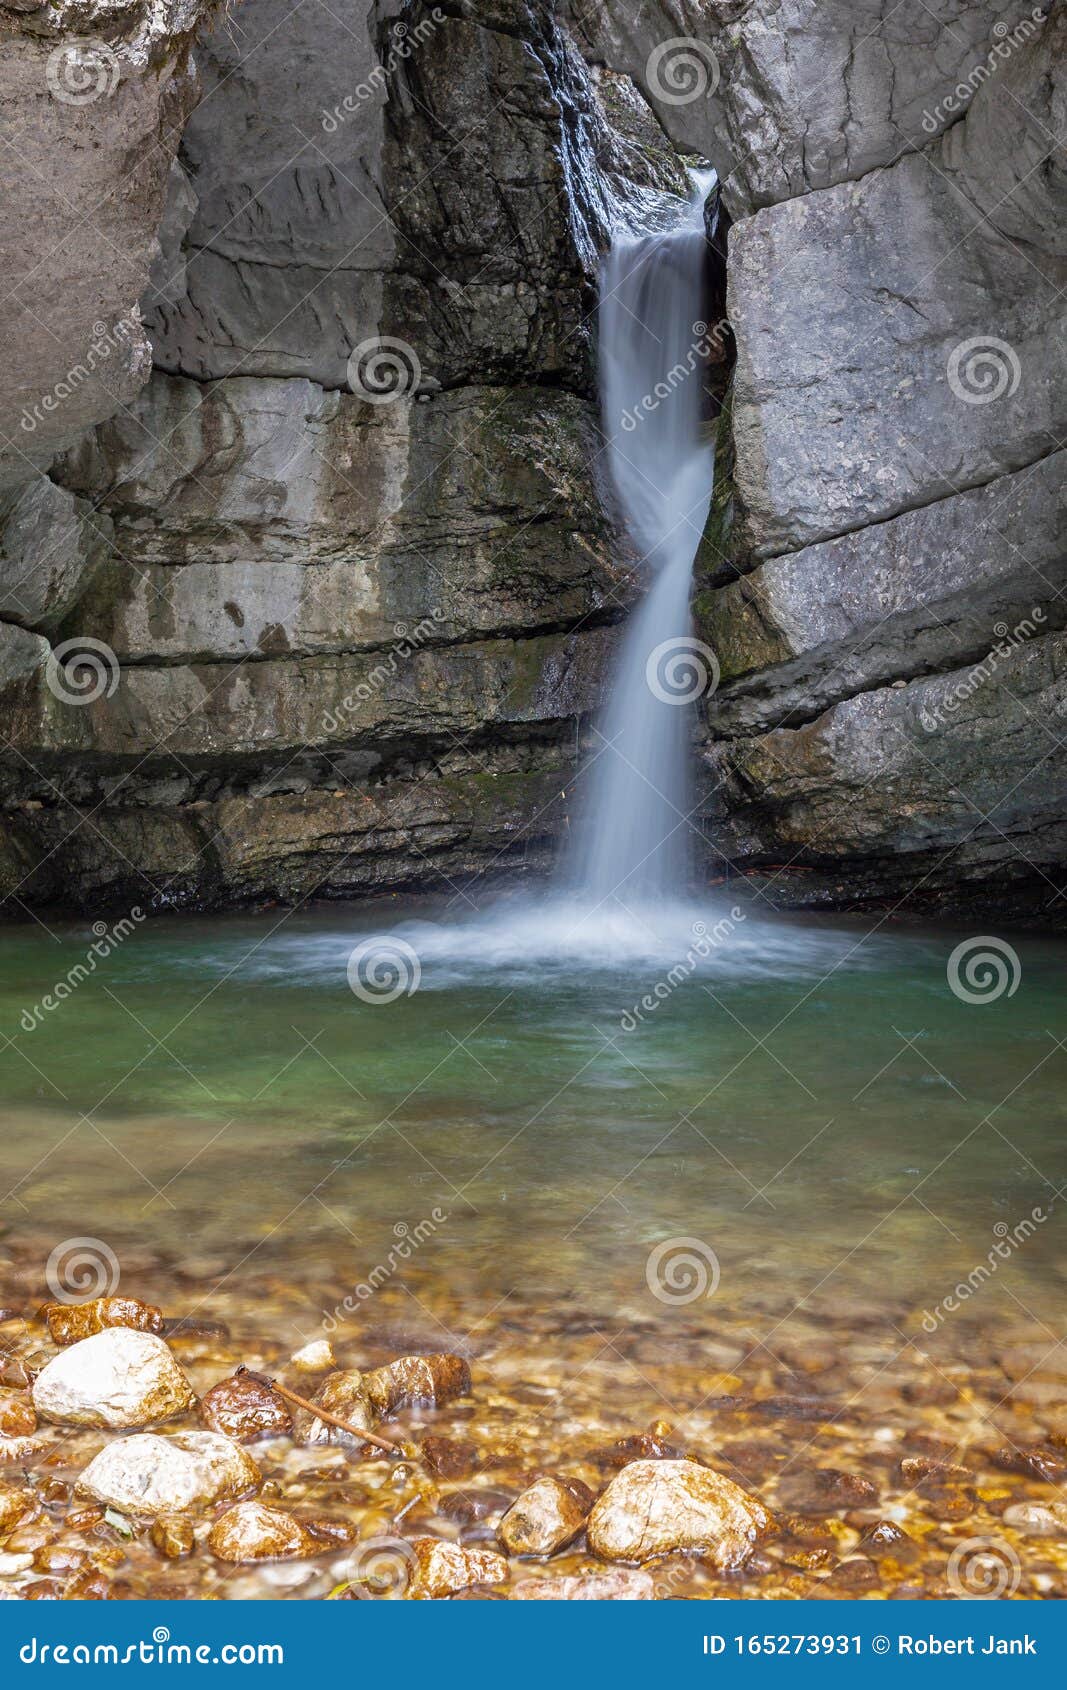 small waterfall at torrente boite